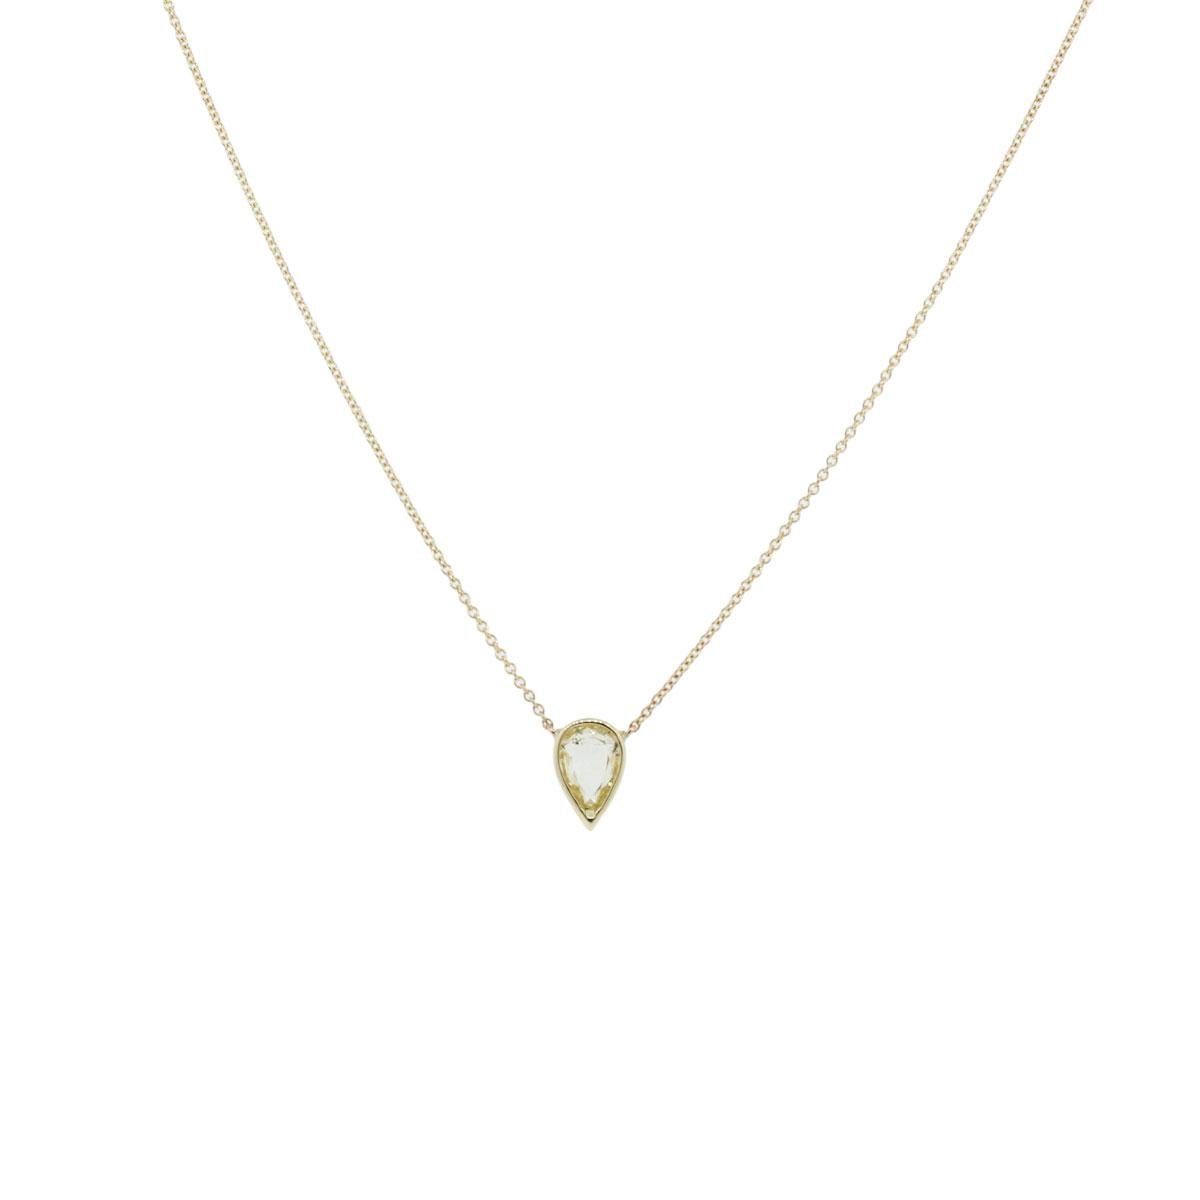 Material: 14k yellow gold
Diamond Details: Rose cut pear shape diamond approximately 1 carat.
Measurements: Necklace measures 16.25″
Pendant Measurements: 0.40″ x 0.10″ x 0.27″
Fastening: Lobster claw clasp
Item Weight: 1.9g (1.2dwt)
Additional